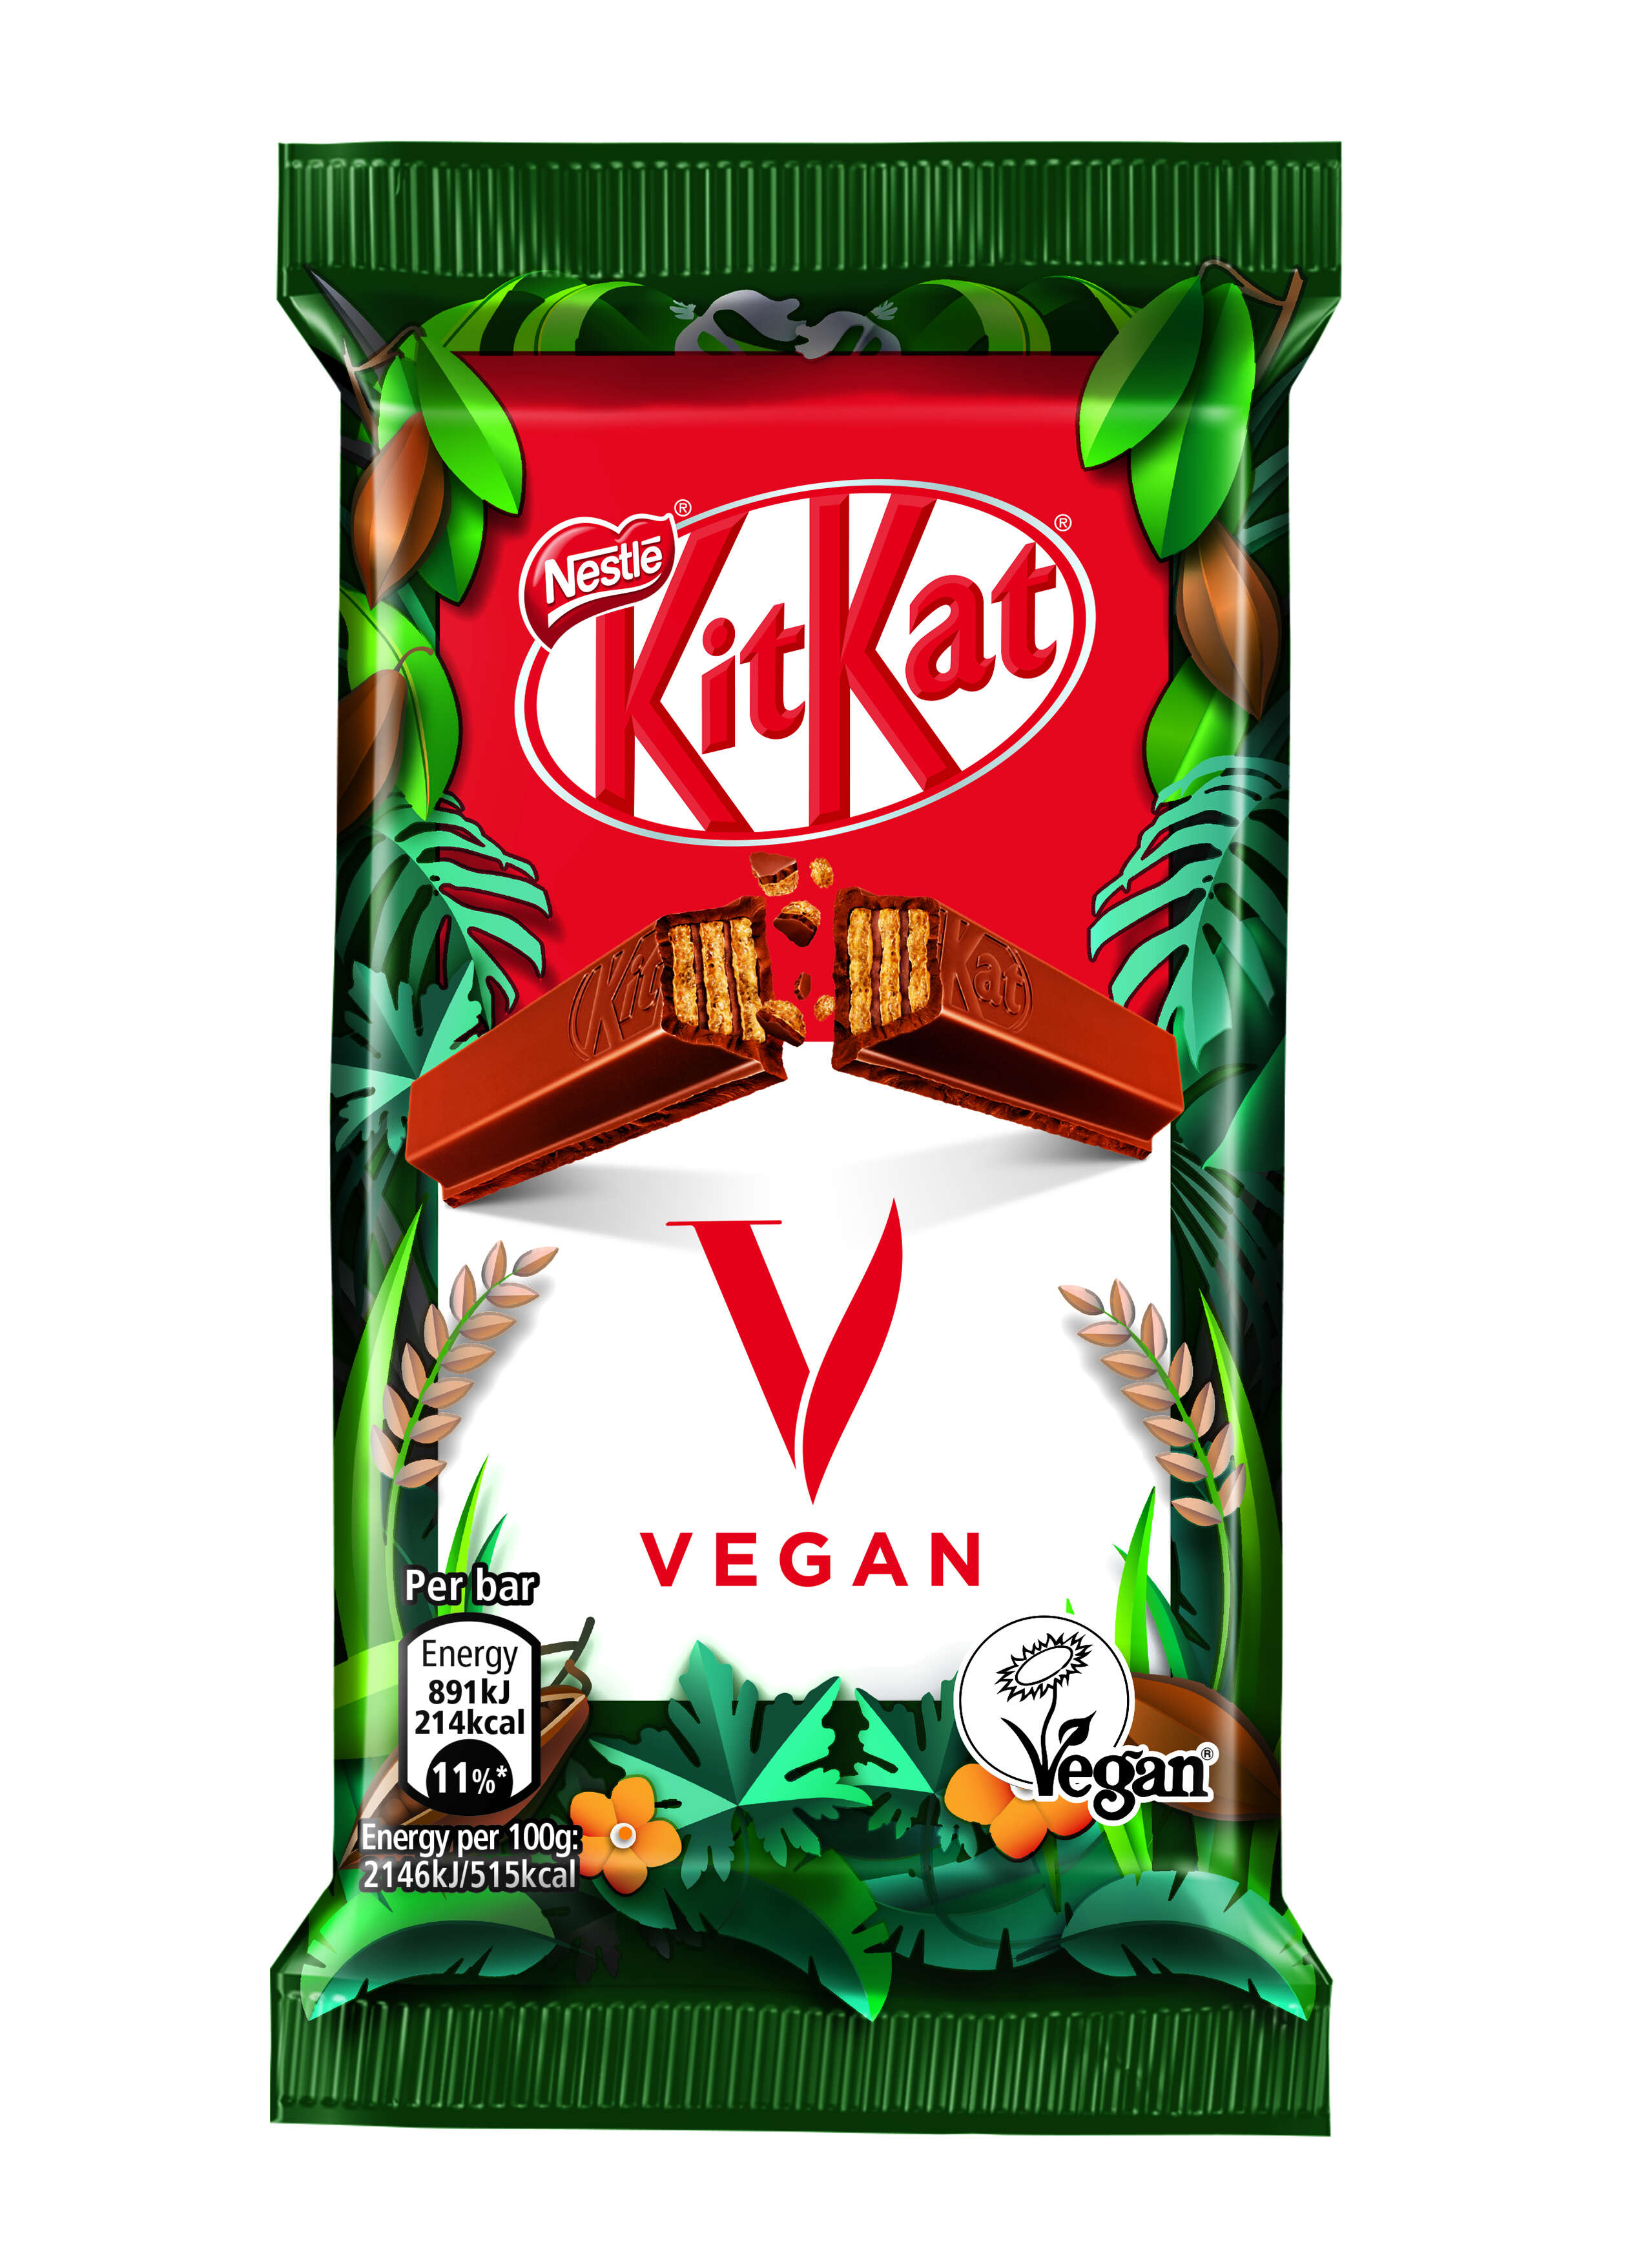 The new vegan KitKat V's wrapper is green in color and plant-inspired.